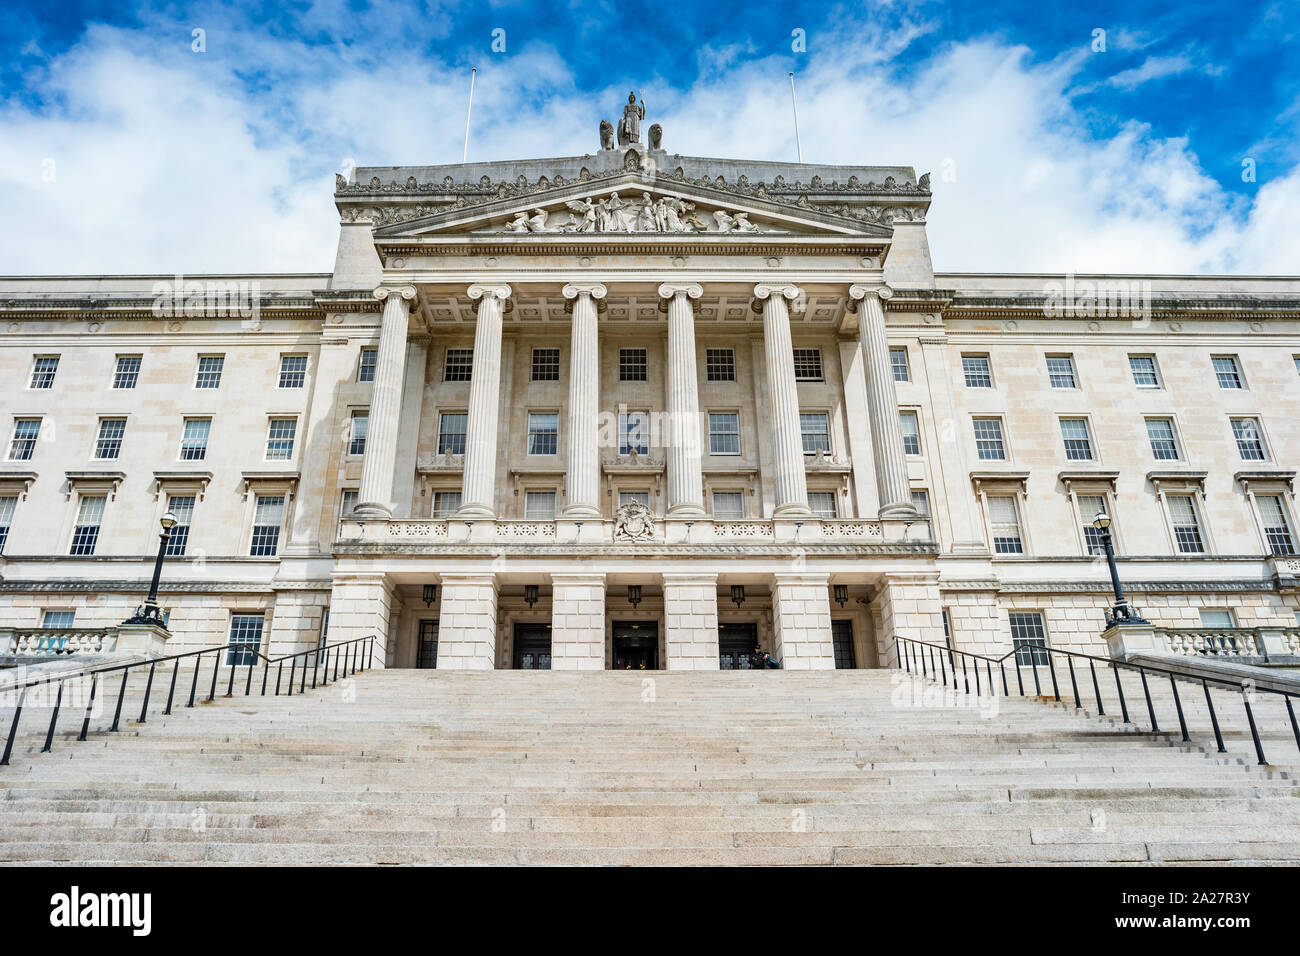 The facade of the Parliament Buildings in Belfast Northern Ireland, United Kingdom. Stock Photo